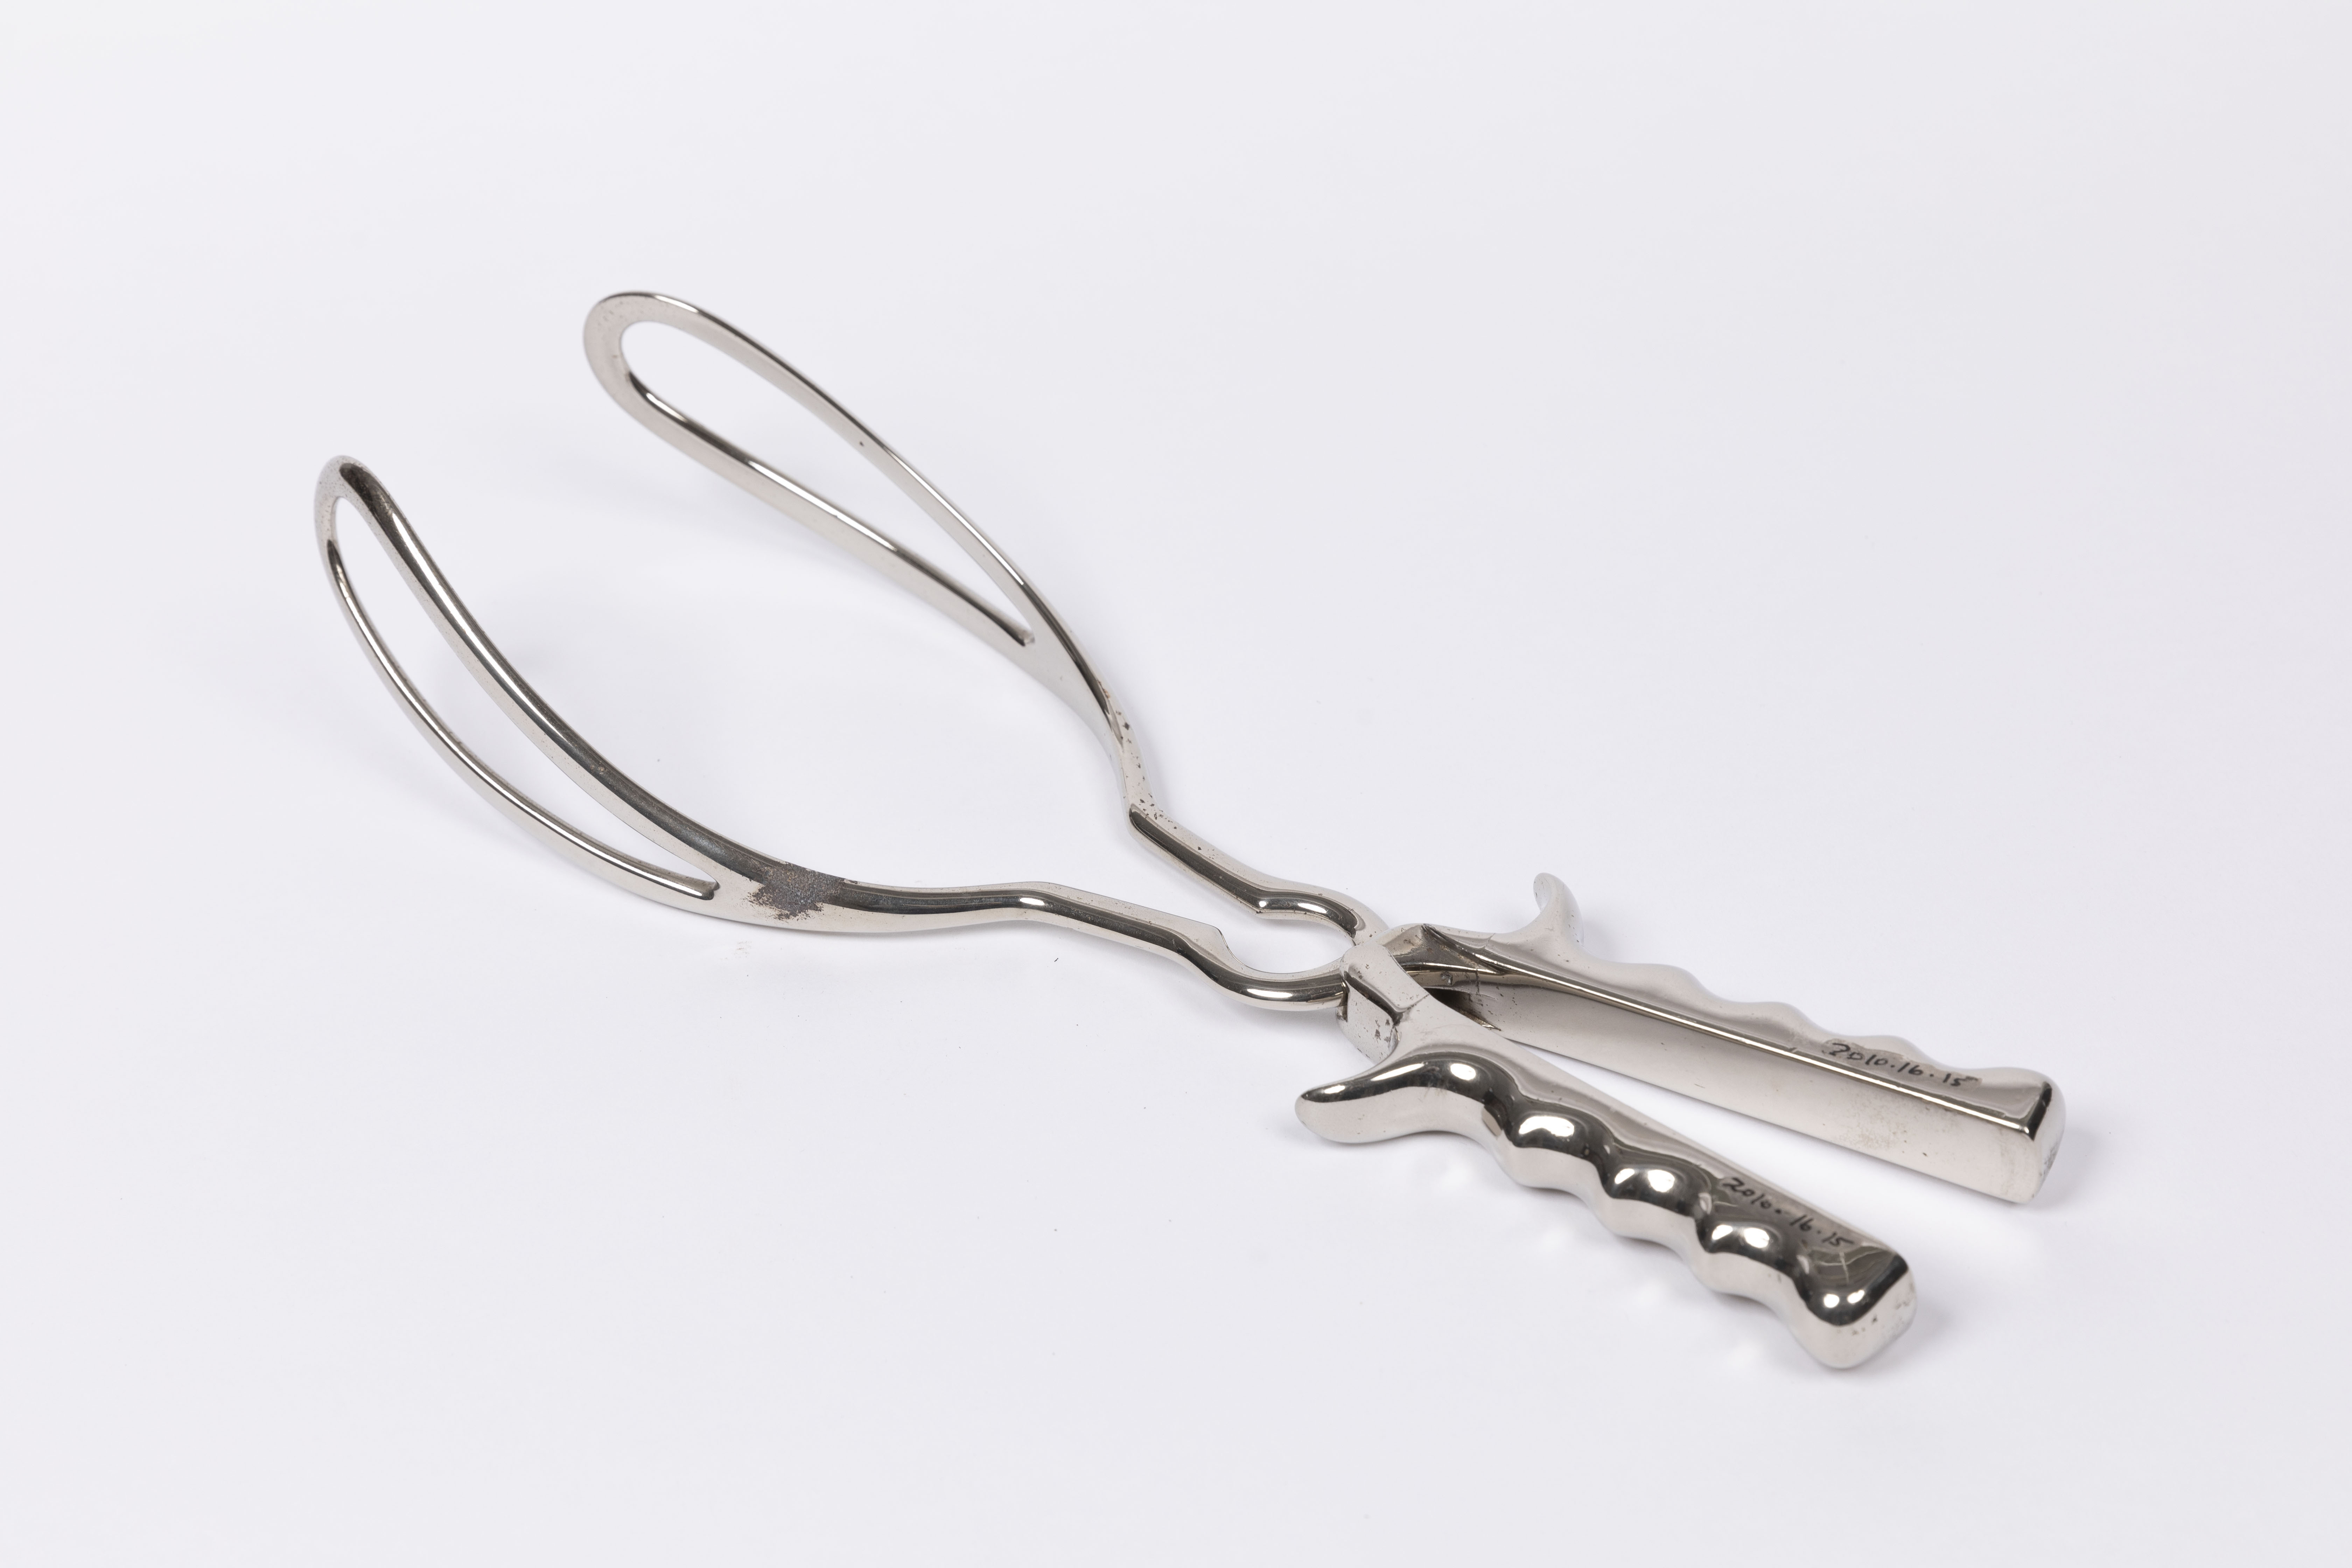 16. Obstetric Forceps